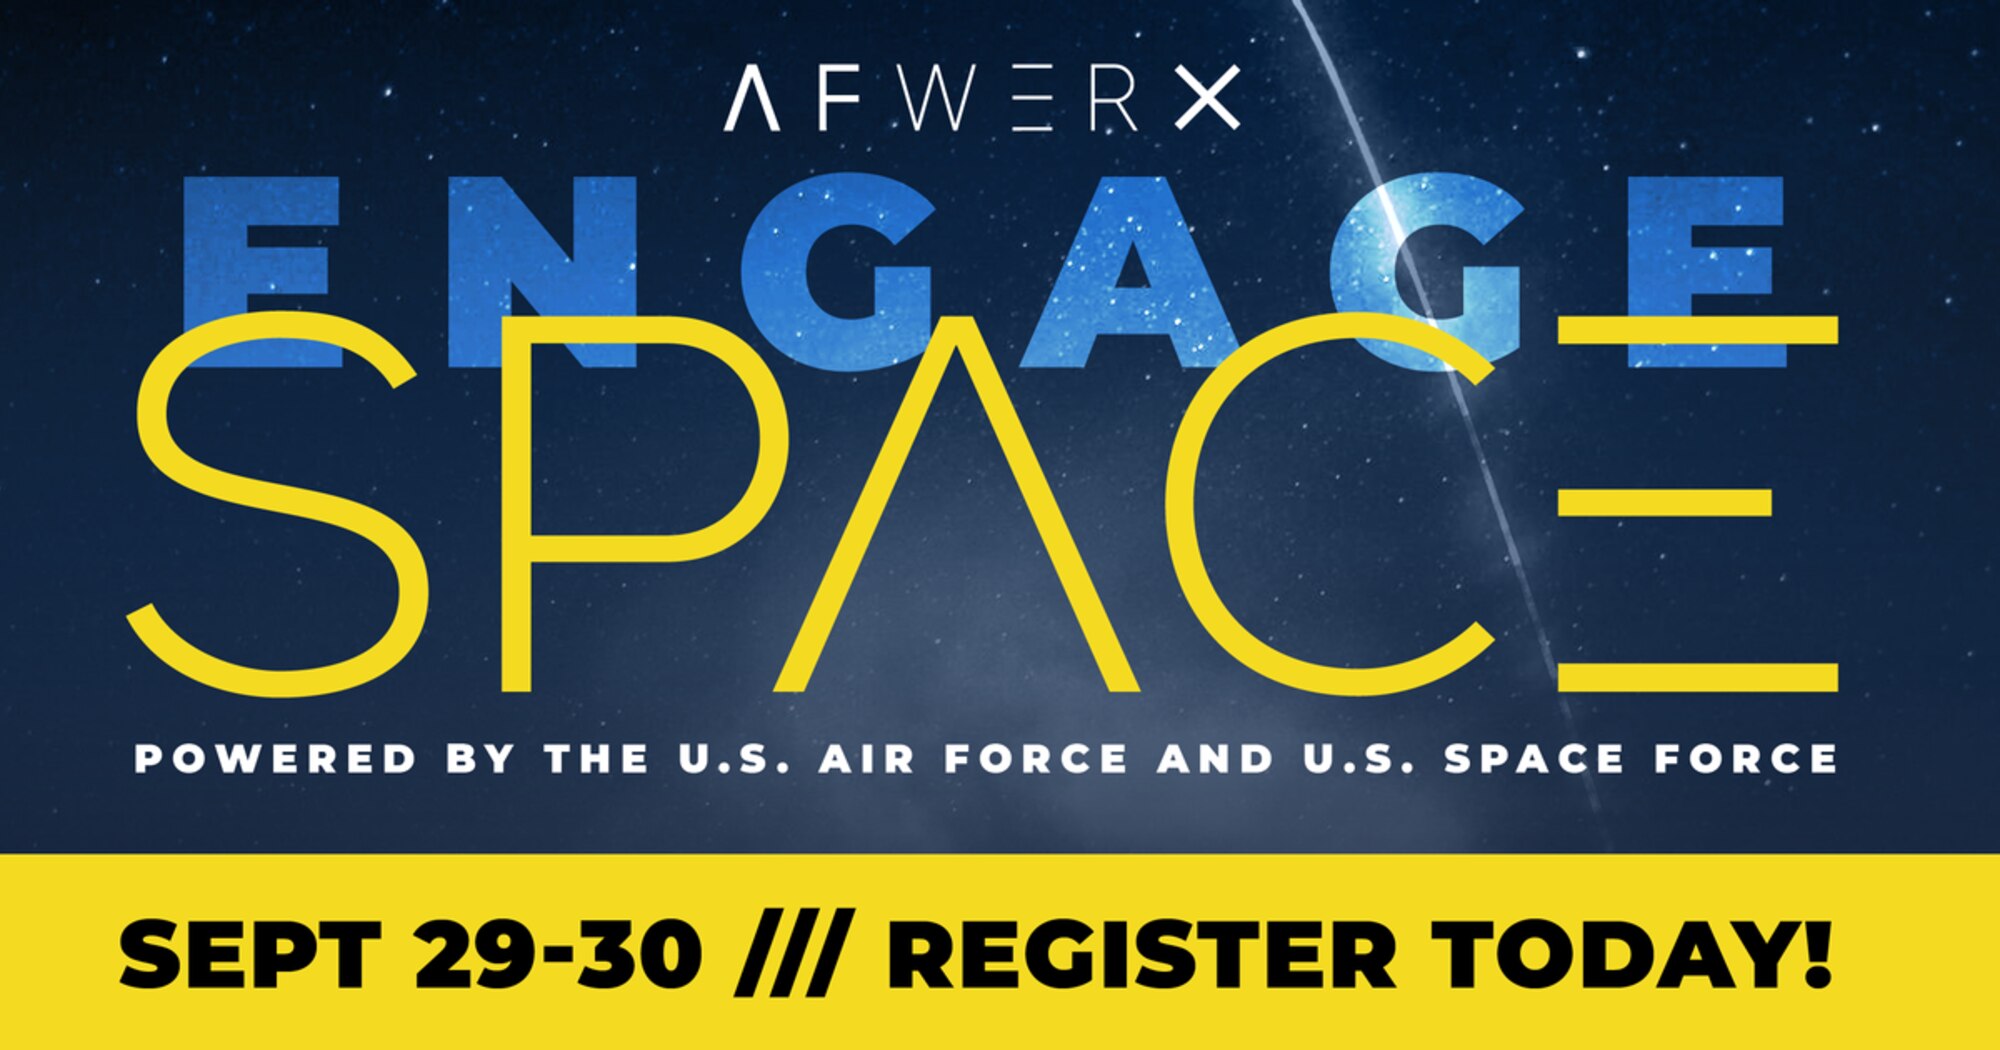 AFWERX, the U.S. Air Force’s innovation catalyst, announced Sept. 16 that registration is now live for EngageSpace virtual event. Join AFWERX, the US Air Force, the U.S. Space Force and the Space Frontier Foundation for this two-day virtual event on September 29-30